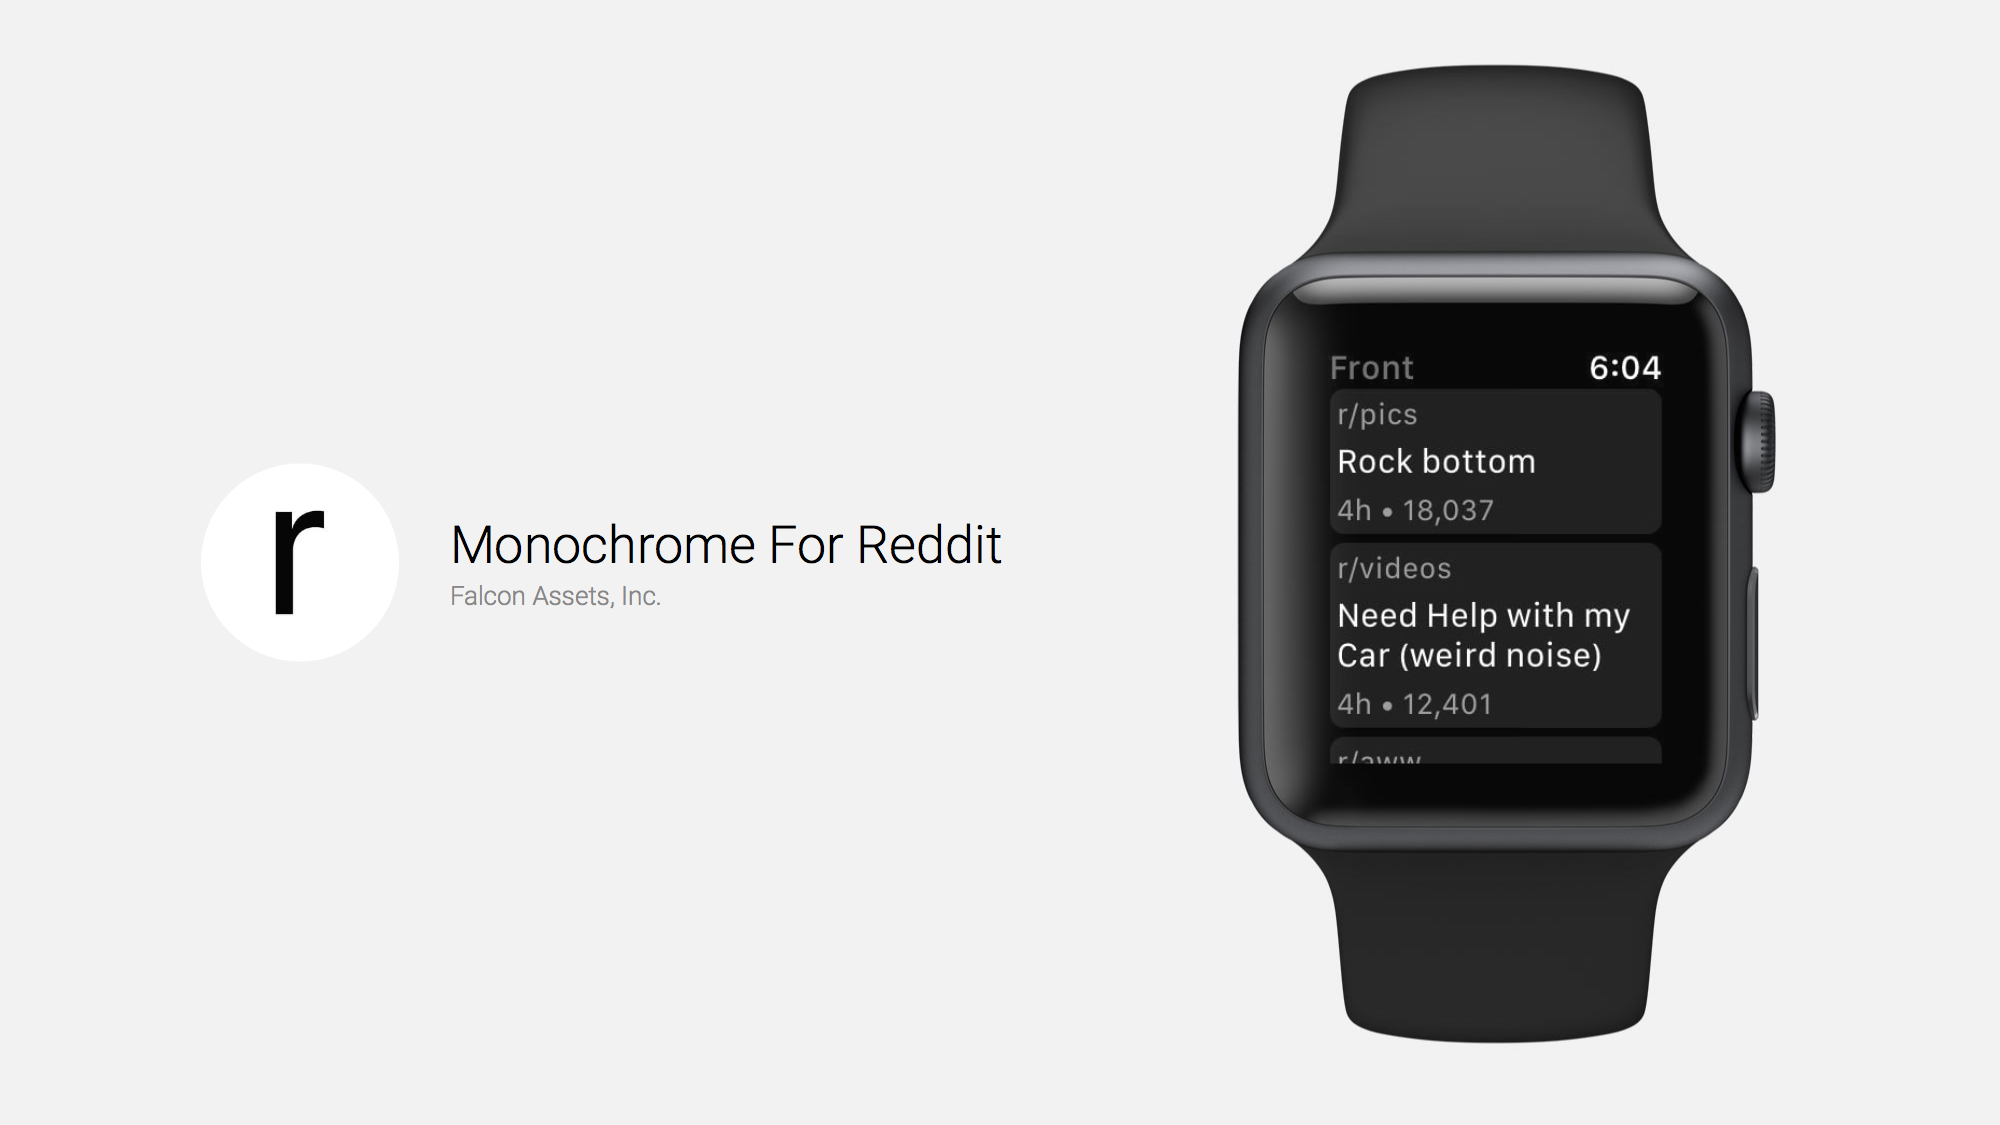 Monochrome for Reddit Functions on the Apple Watch